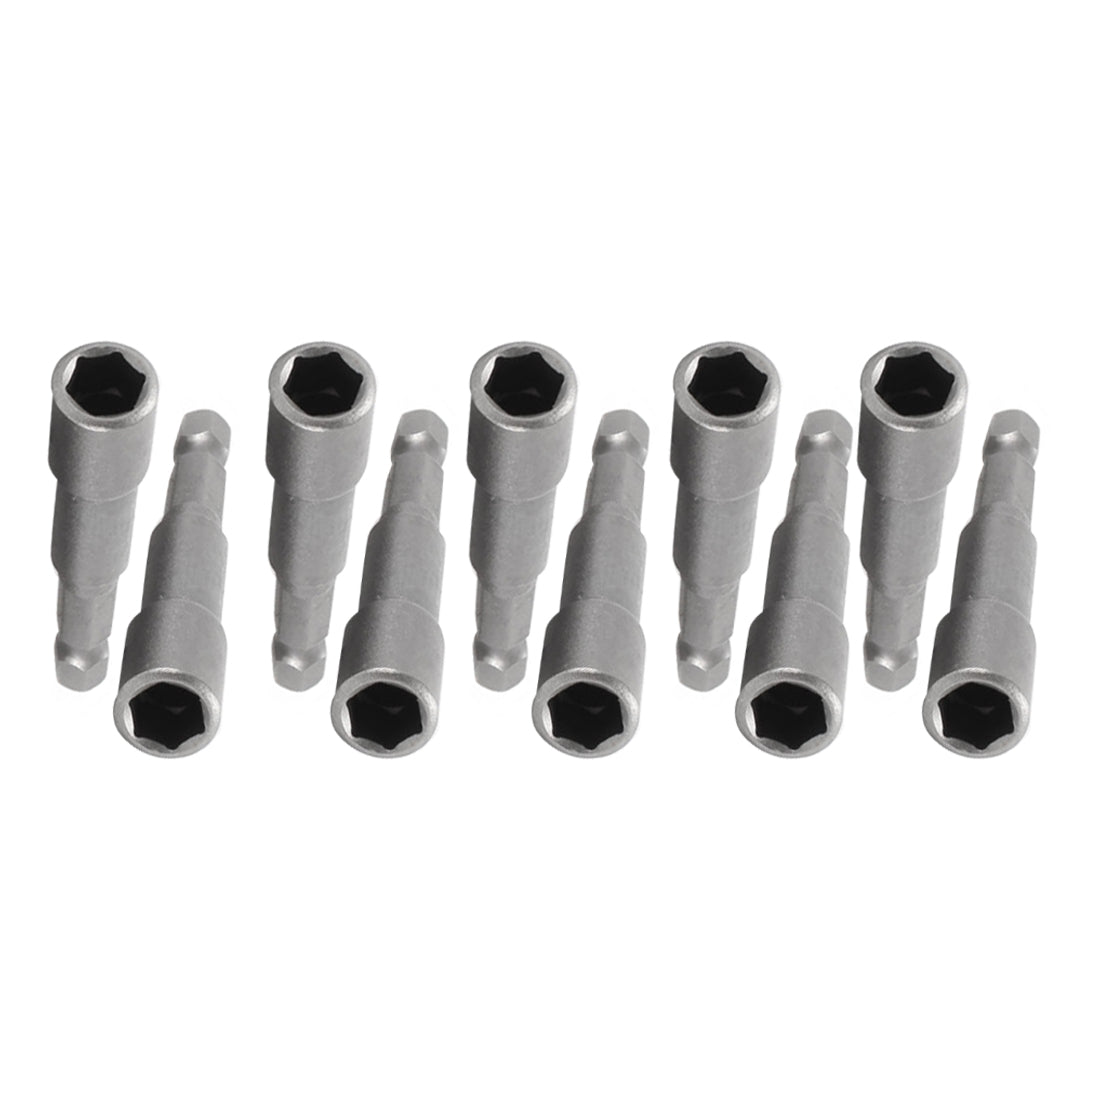 uxcell Uxcell 10 Pcs 1/4" Shank 7mm Socket Hex Driver Power Tool Non-Magnetic